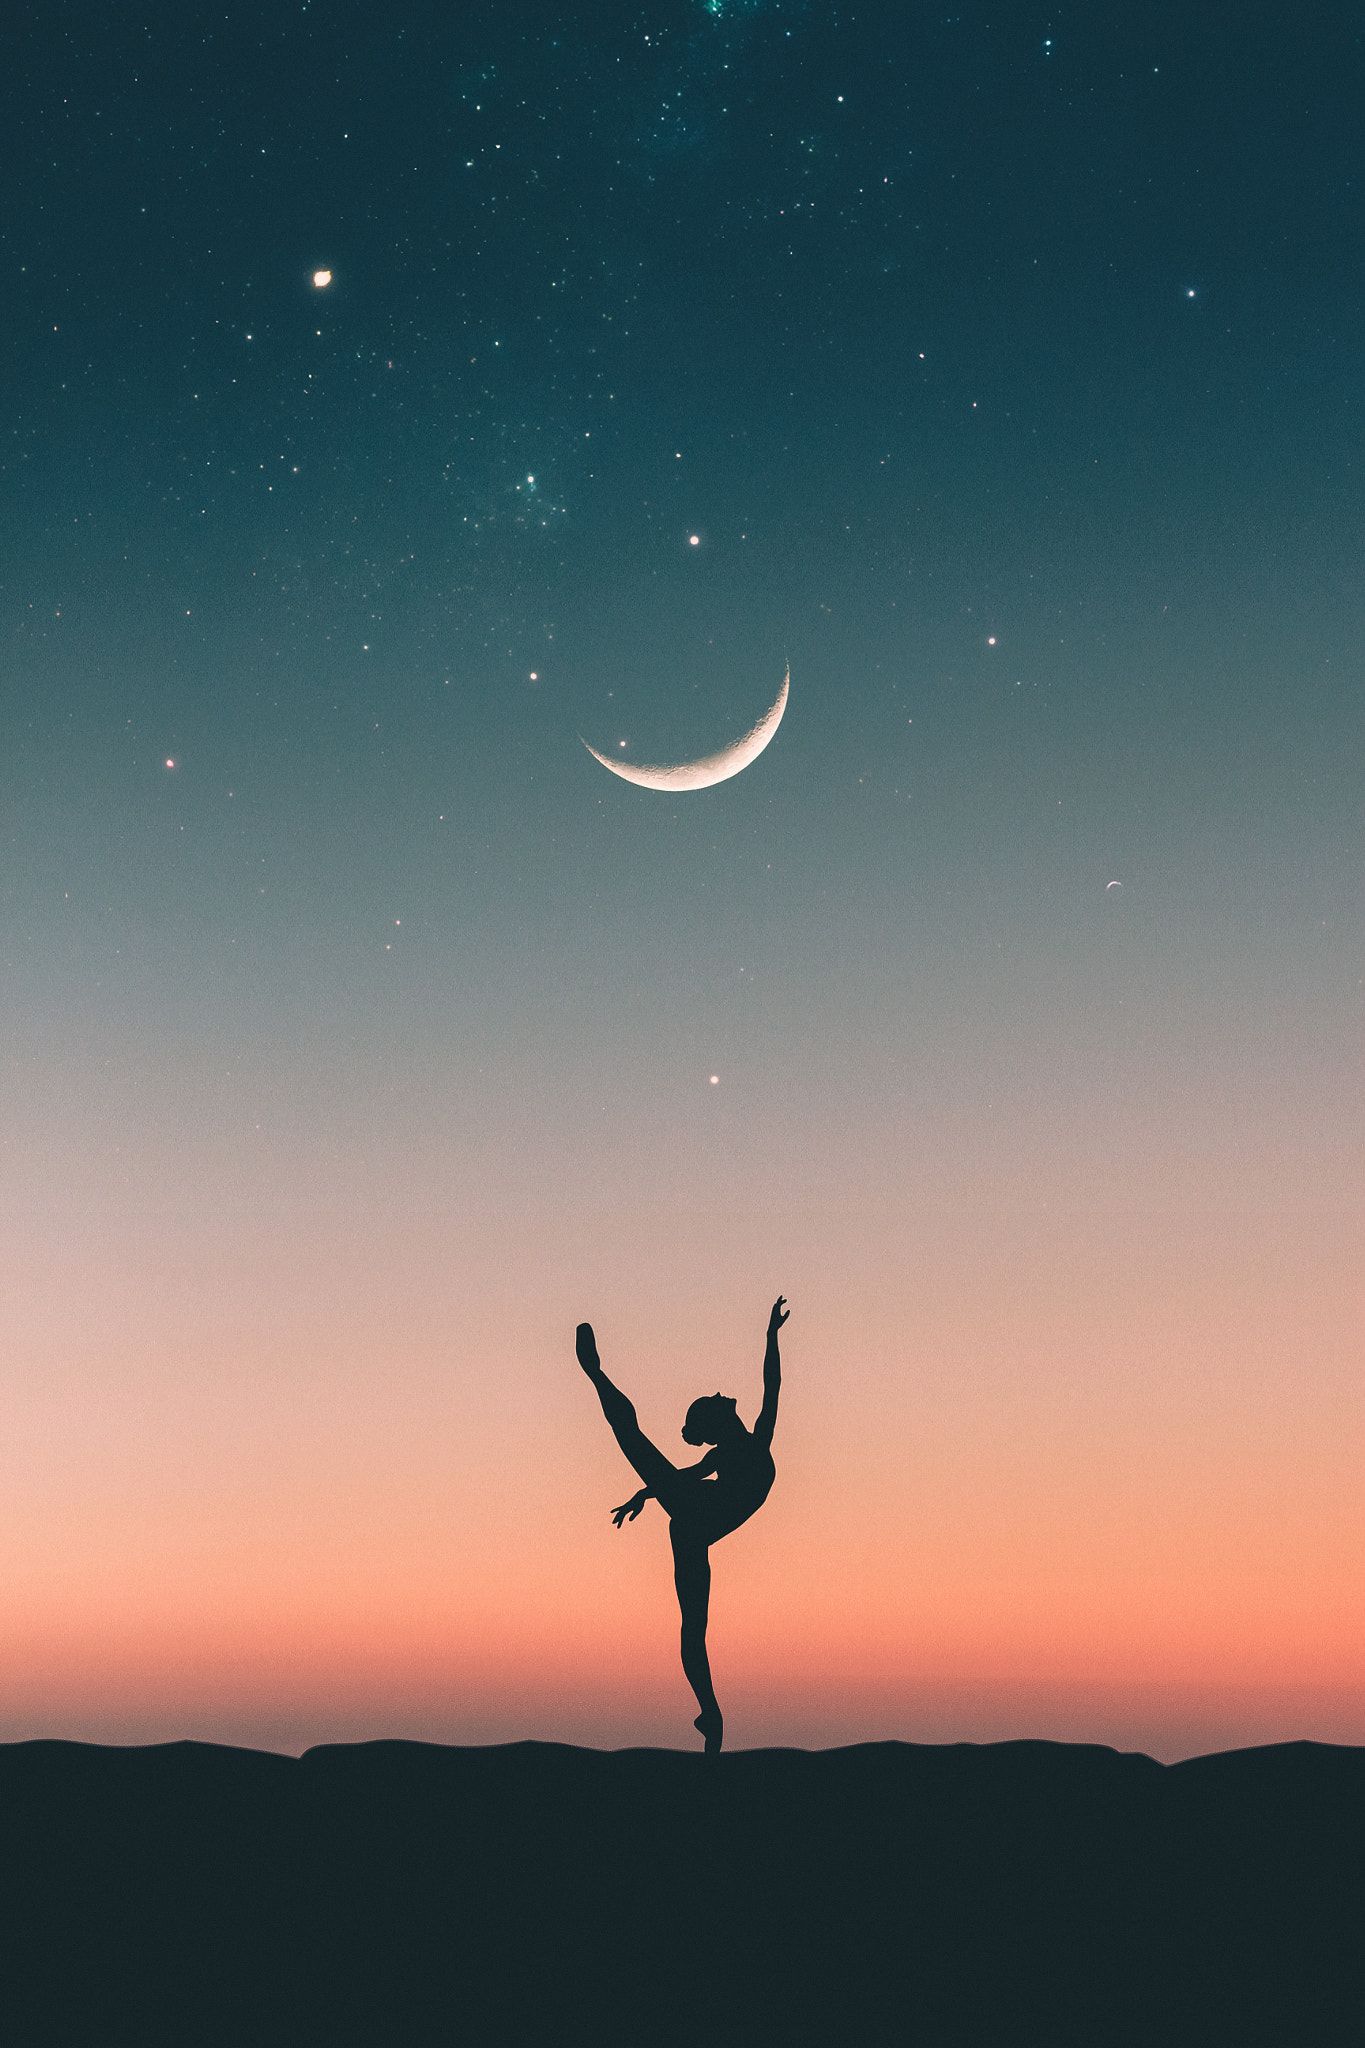 A person standing on a hill at night with the moon and stars in the background - Dance, gymnastics, ballet